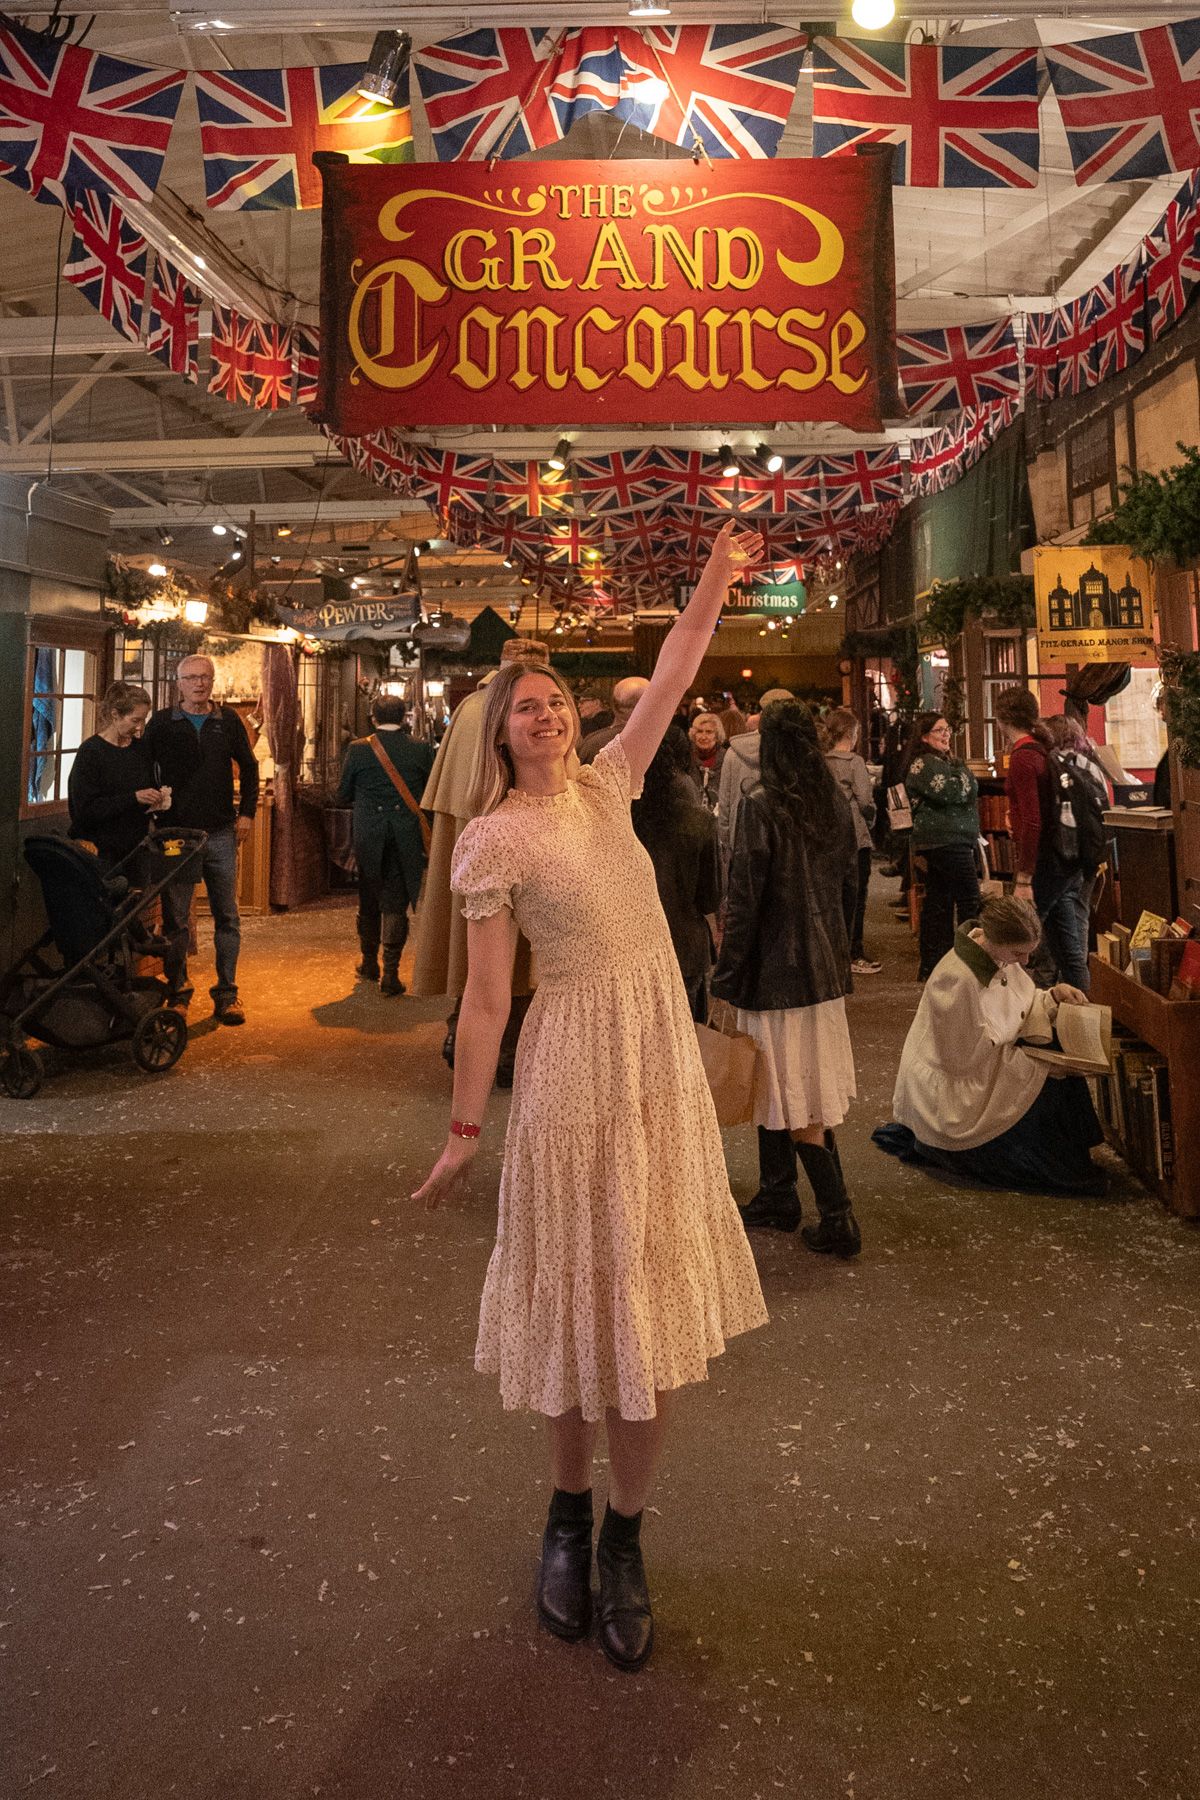 A woman in a white dress stands with her arm up gesturing towards a red and gold Grand Concourse sign at the Dickens Fair in San Francisco.